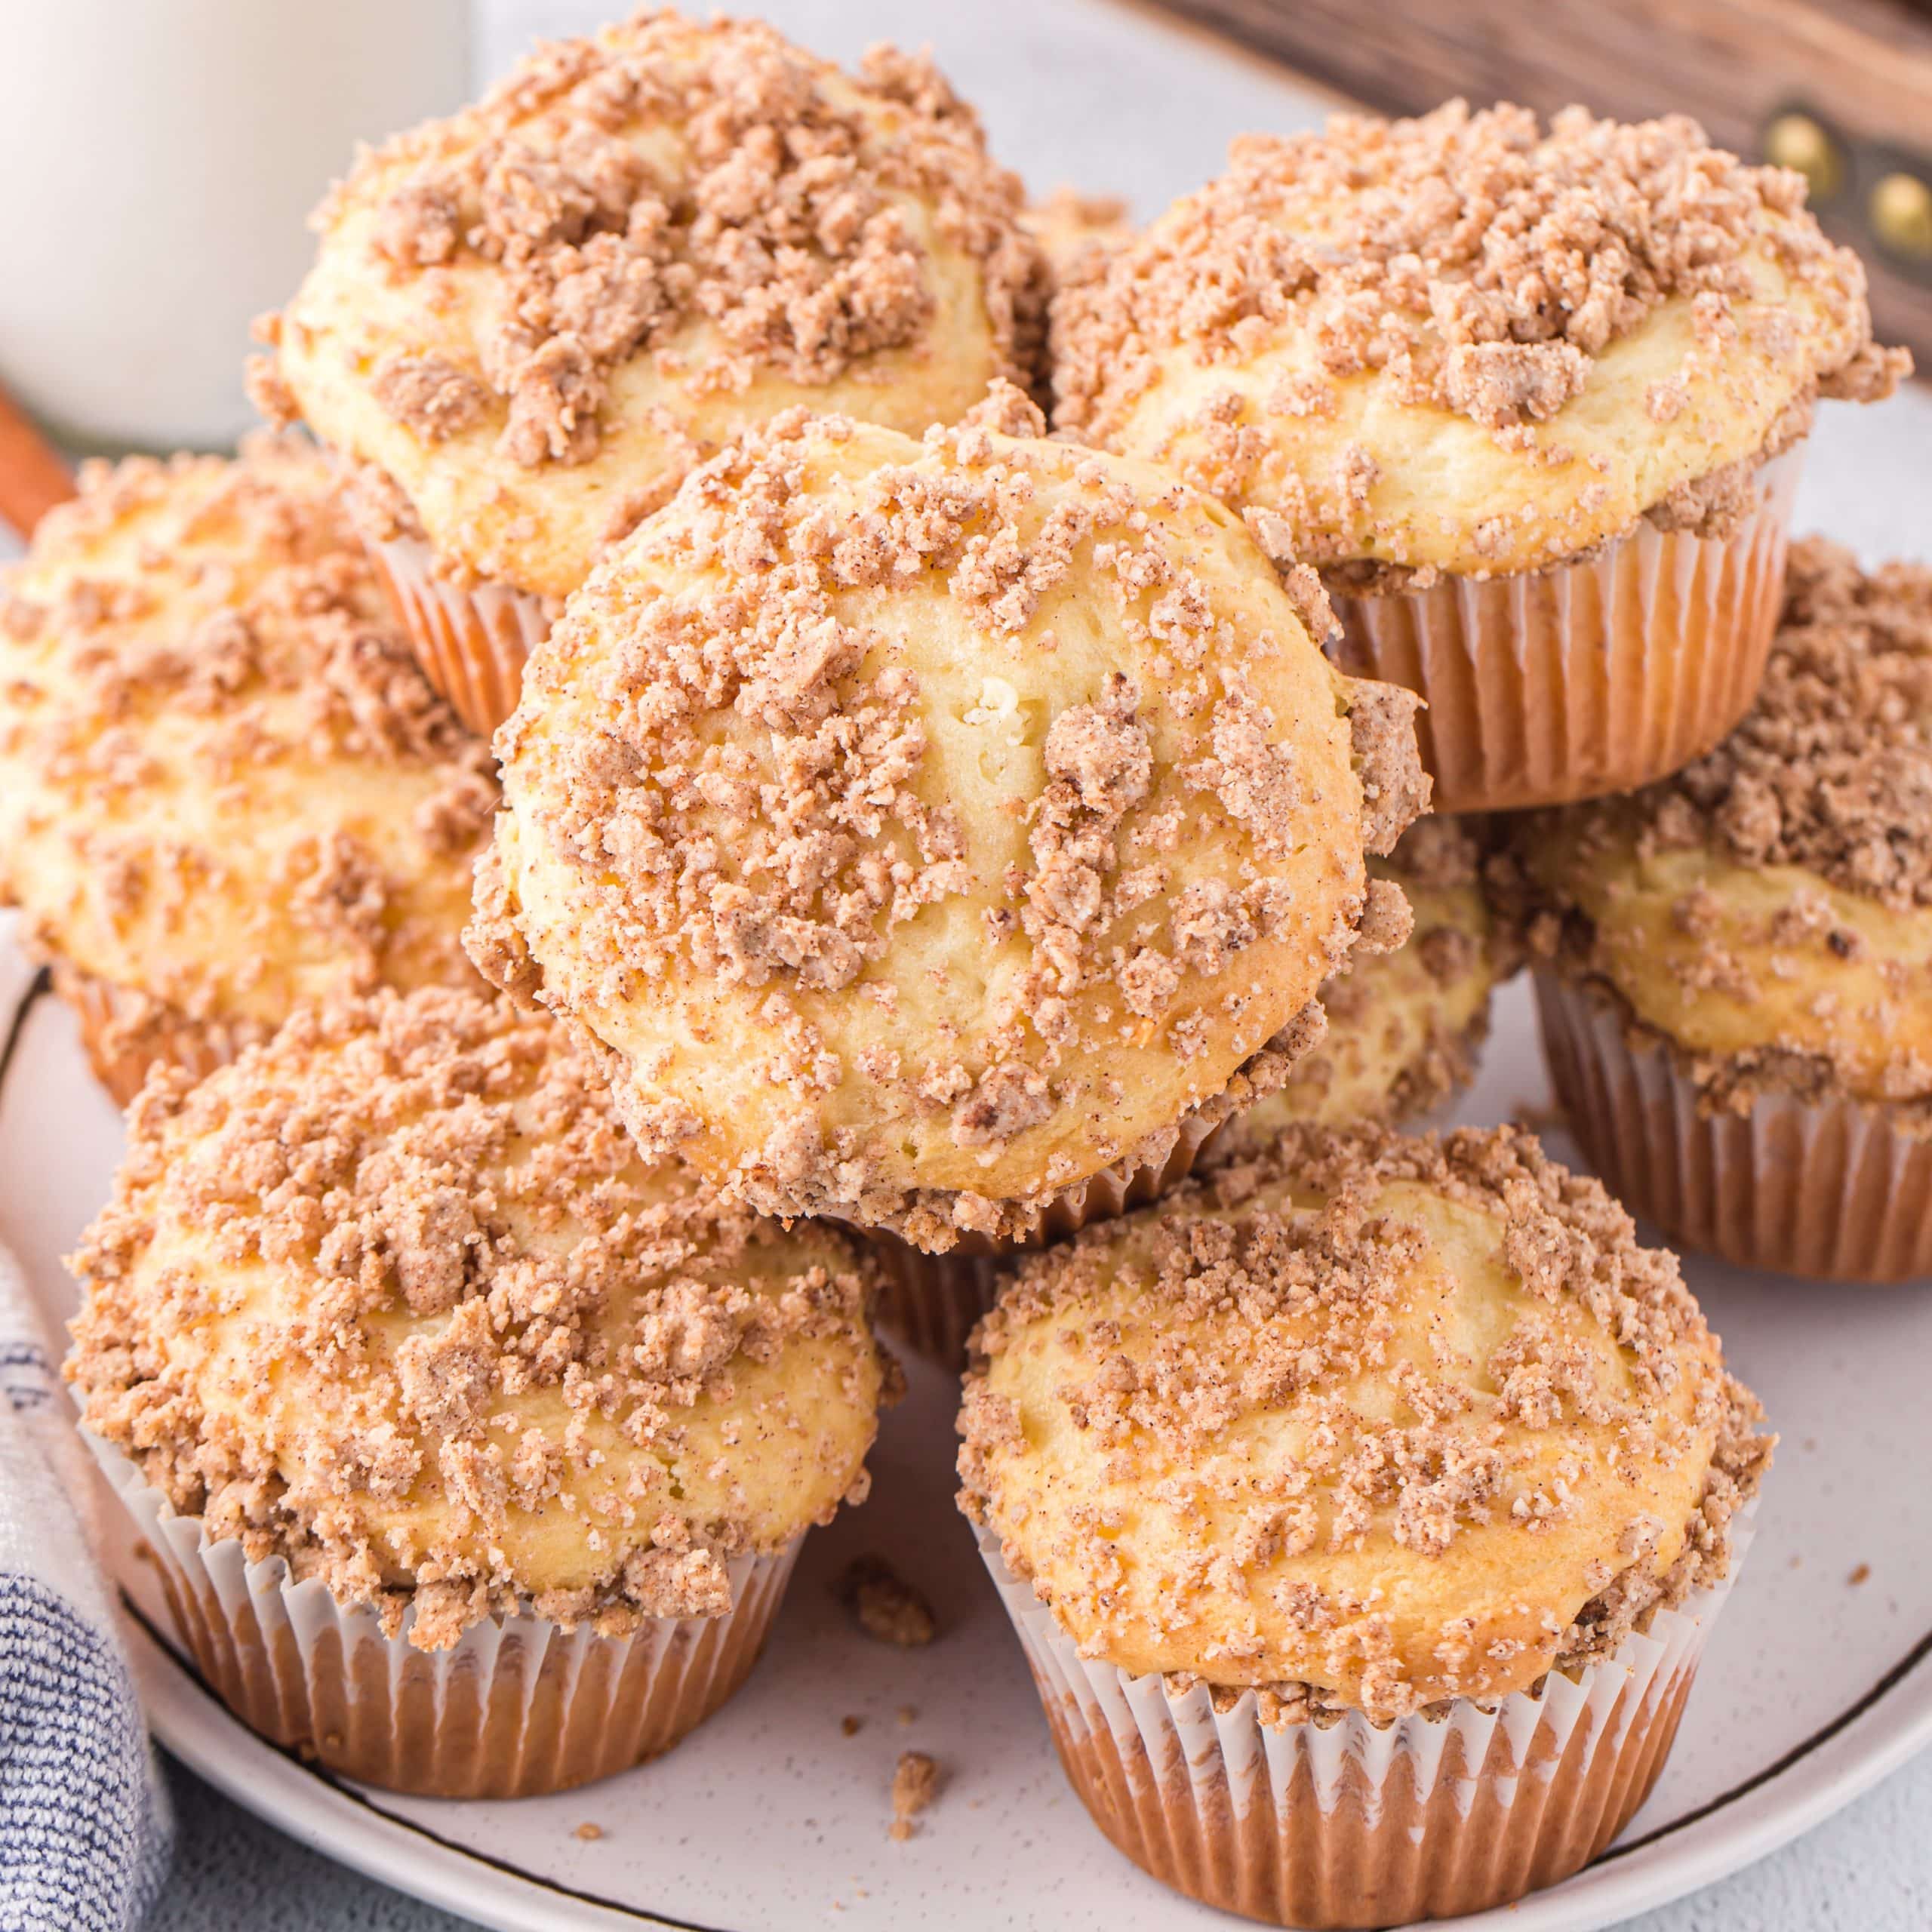 Cinnamon Streusel Muffins (made with cake mix)